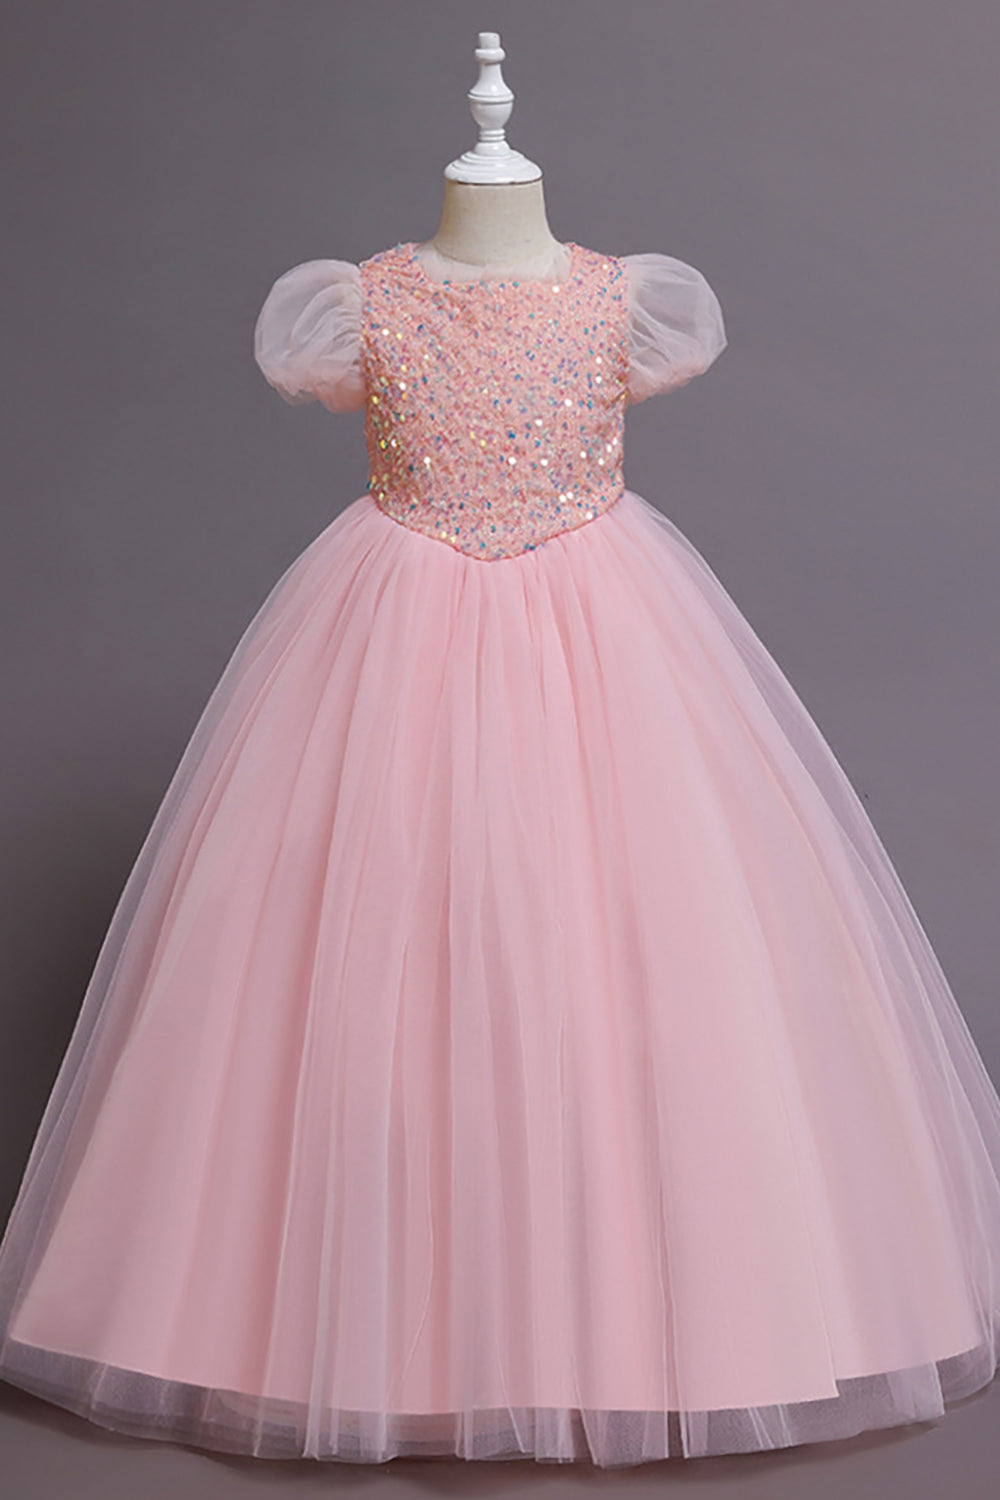 Light Blue Puff Sleeves Tulle Flower Girl Dress with Sequins